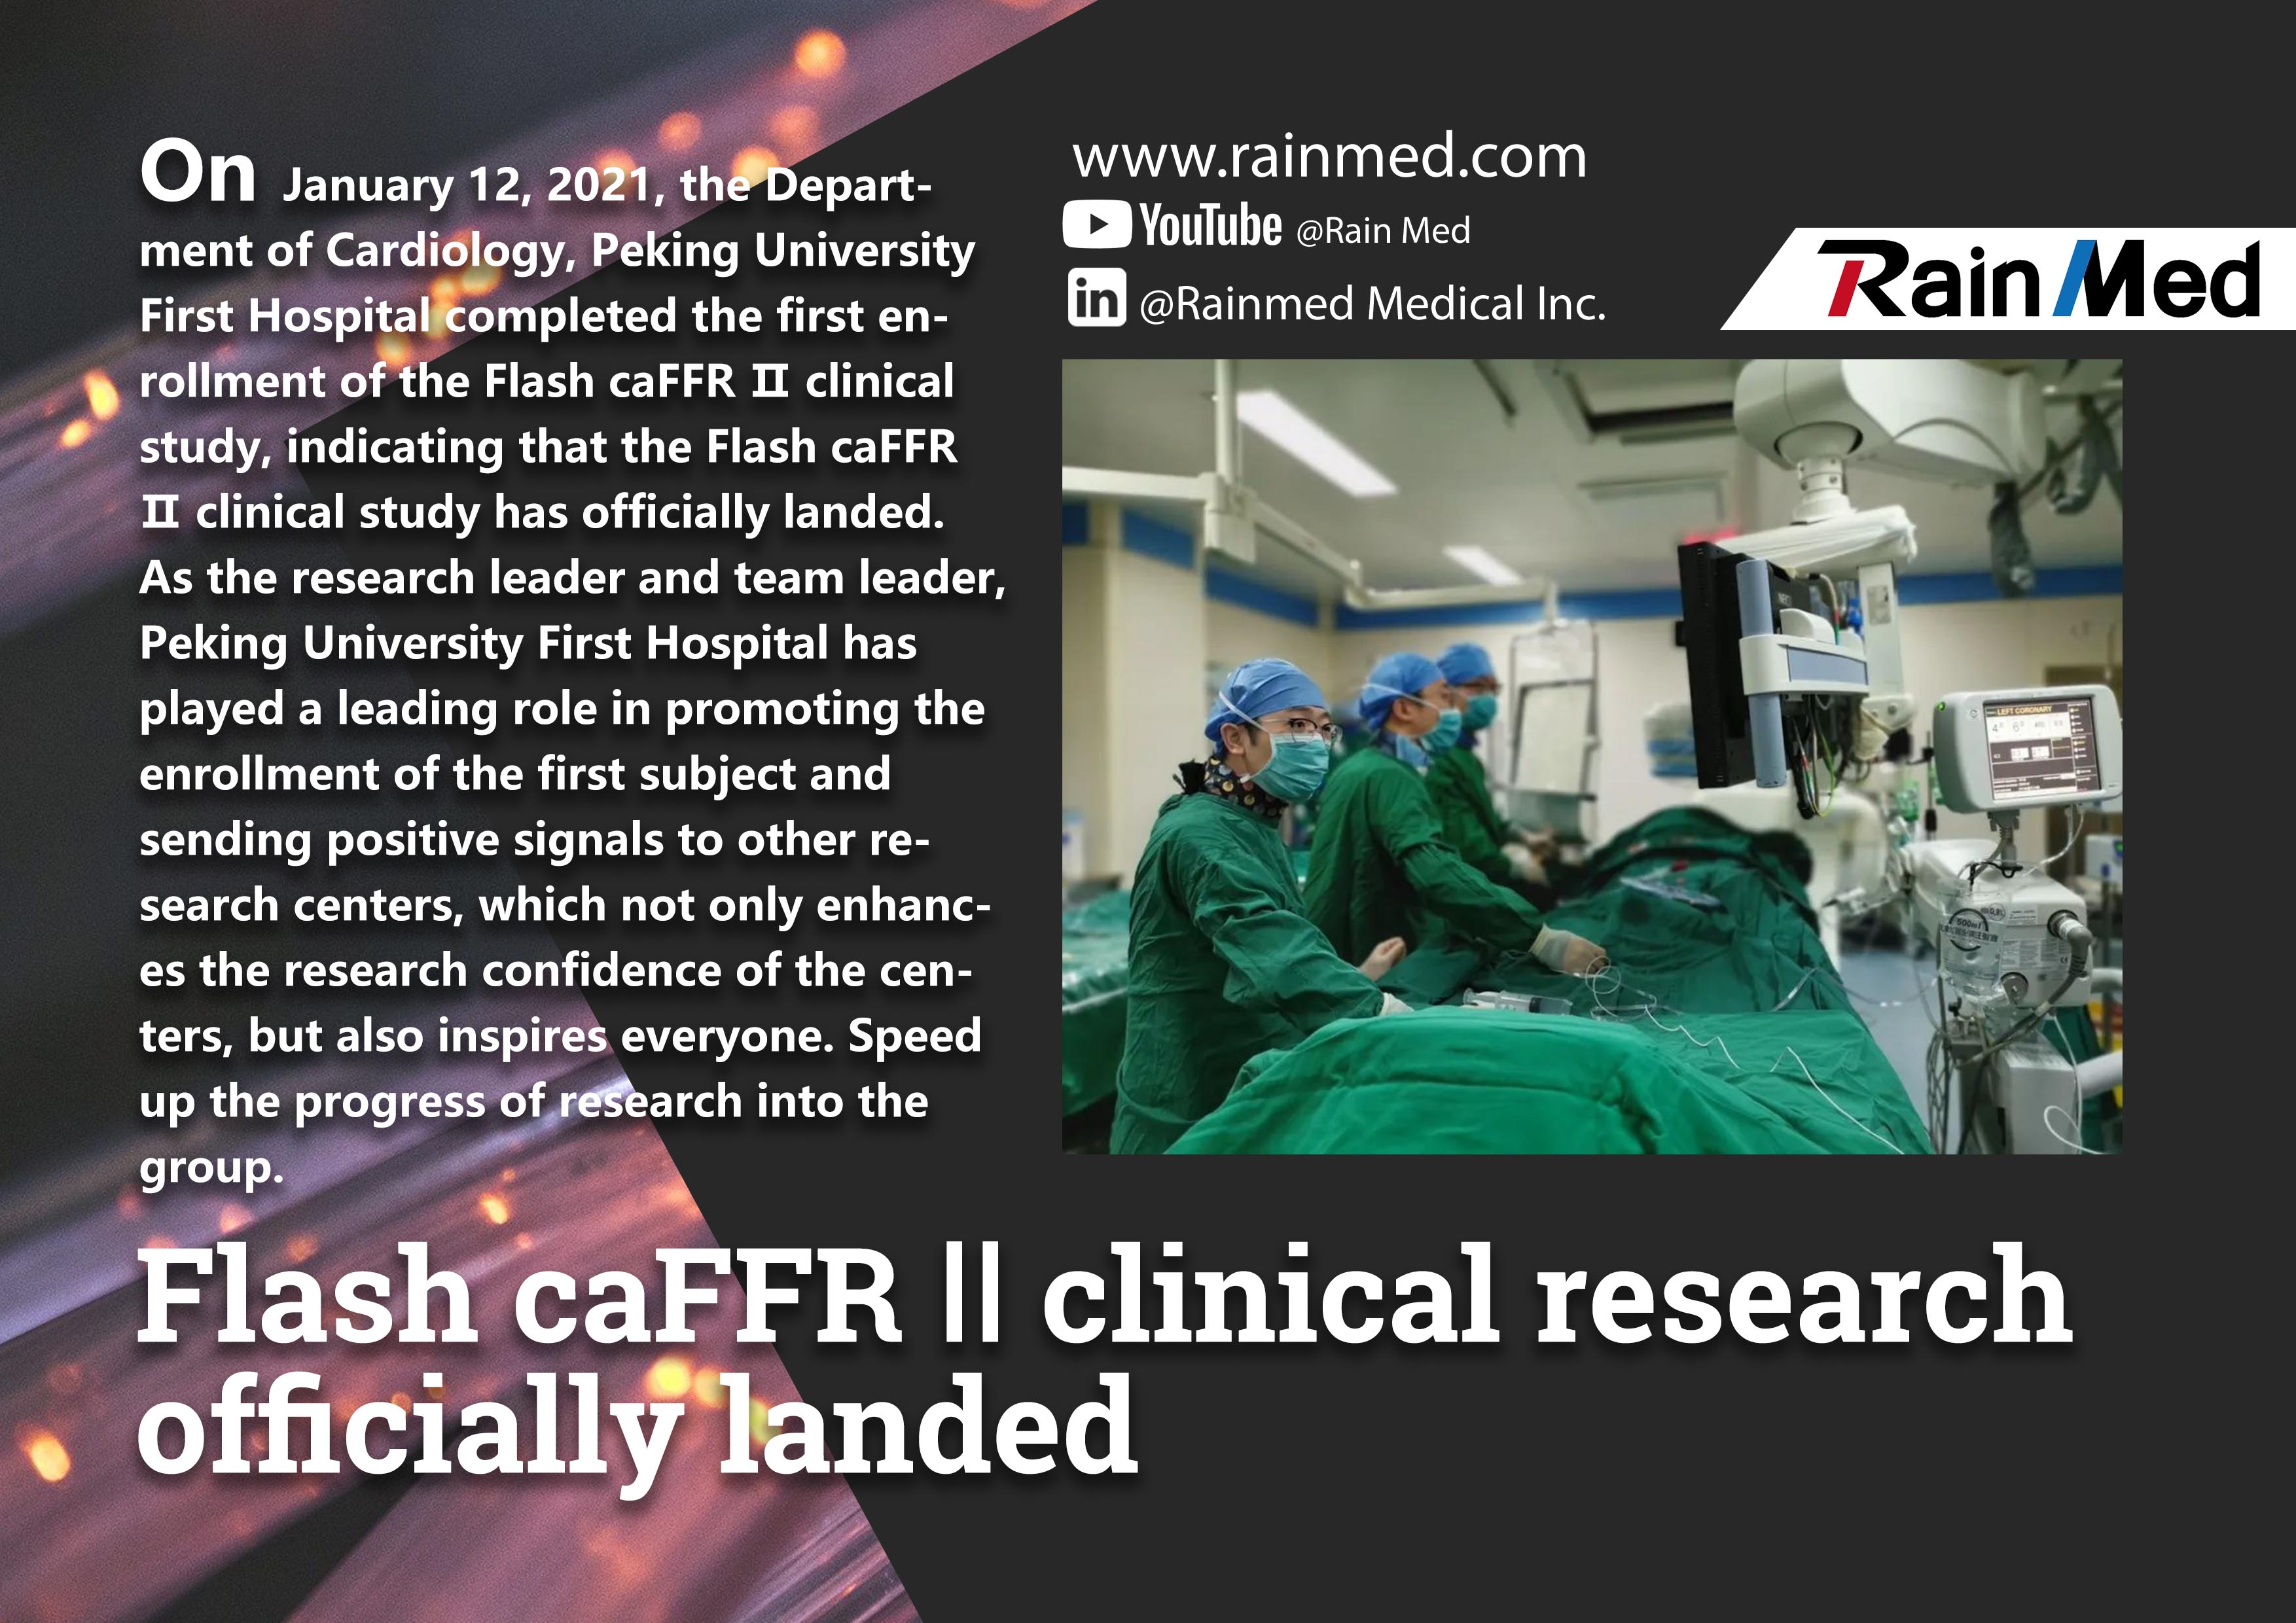 Flash caFFR II clinical research offiocially landed